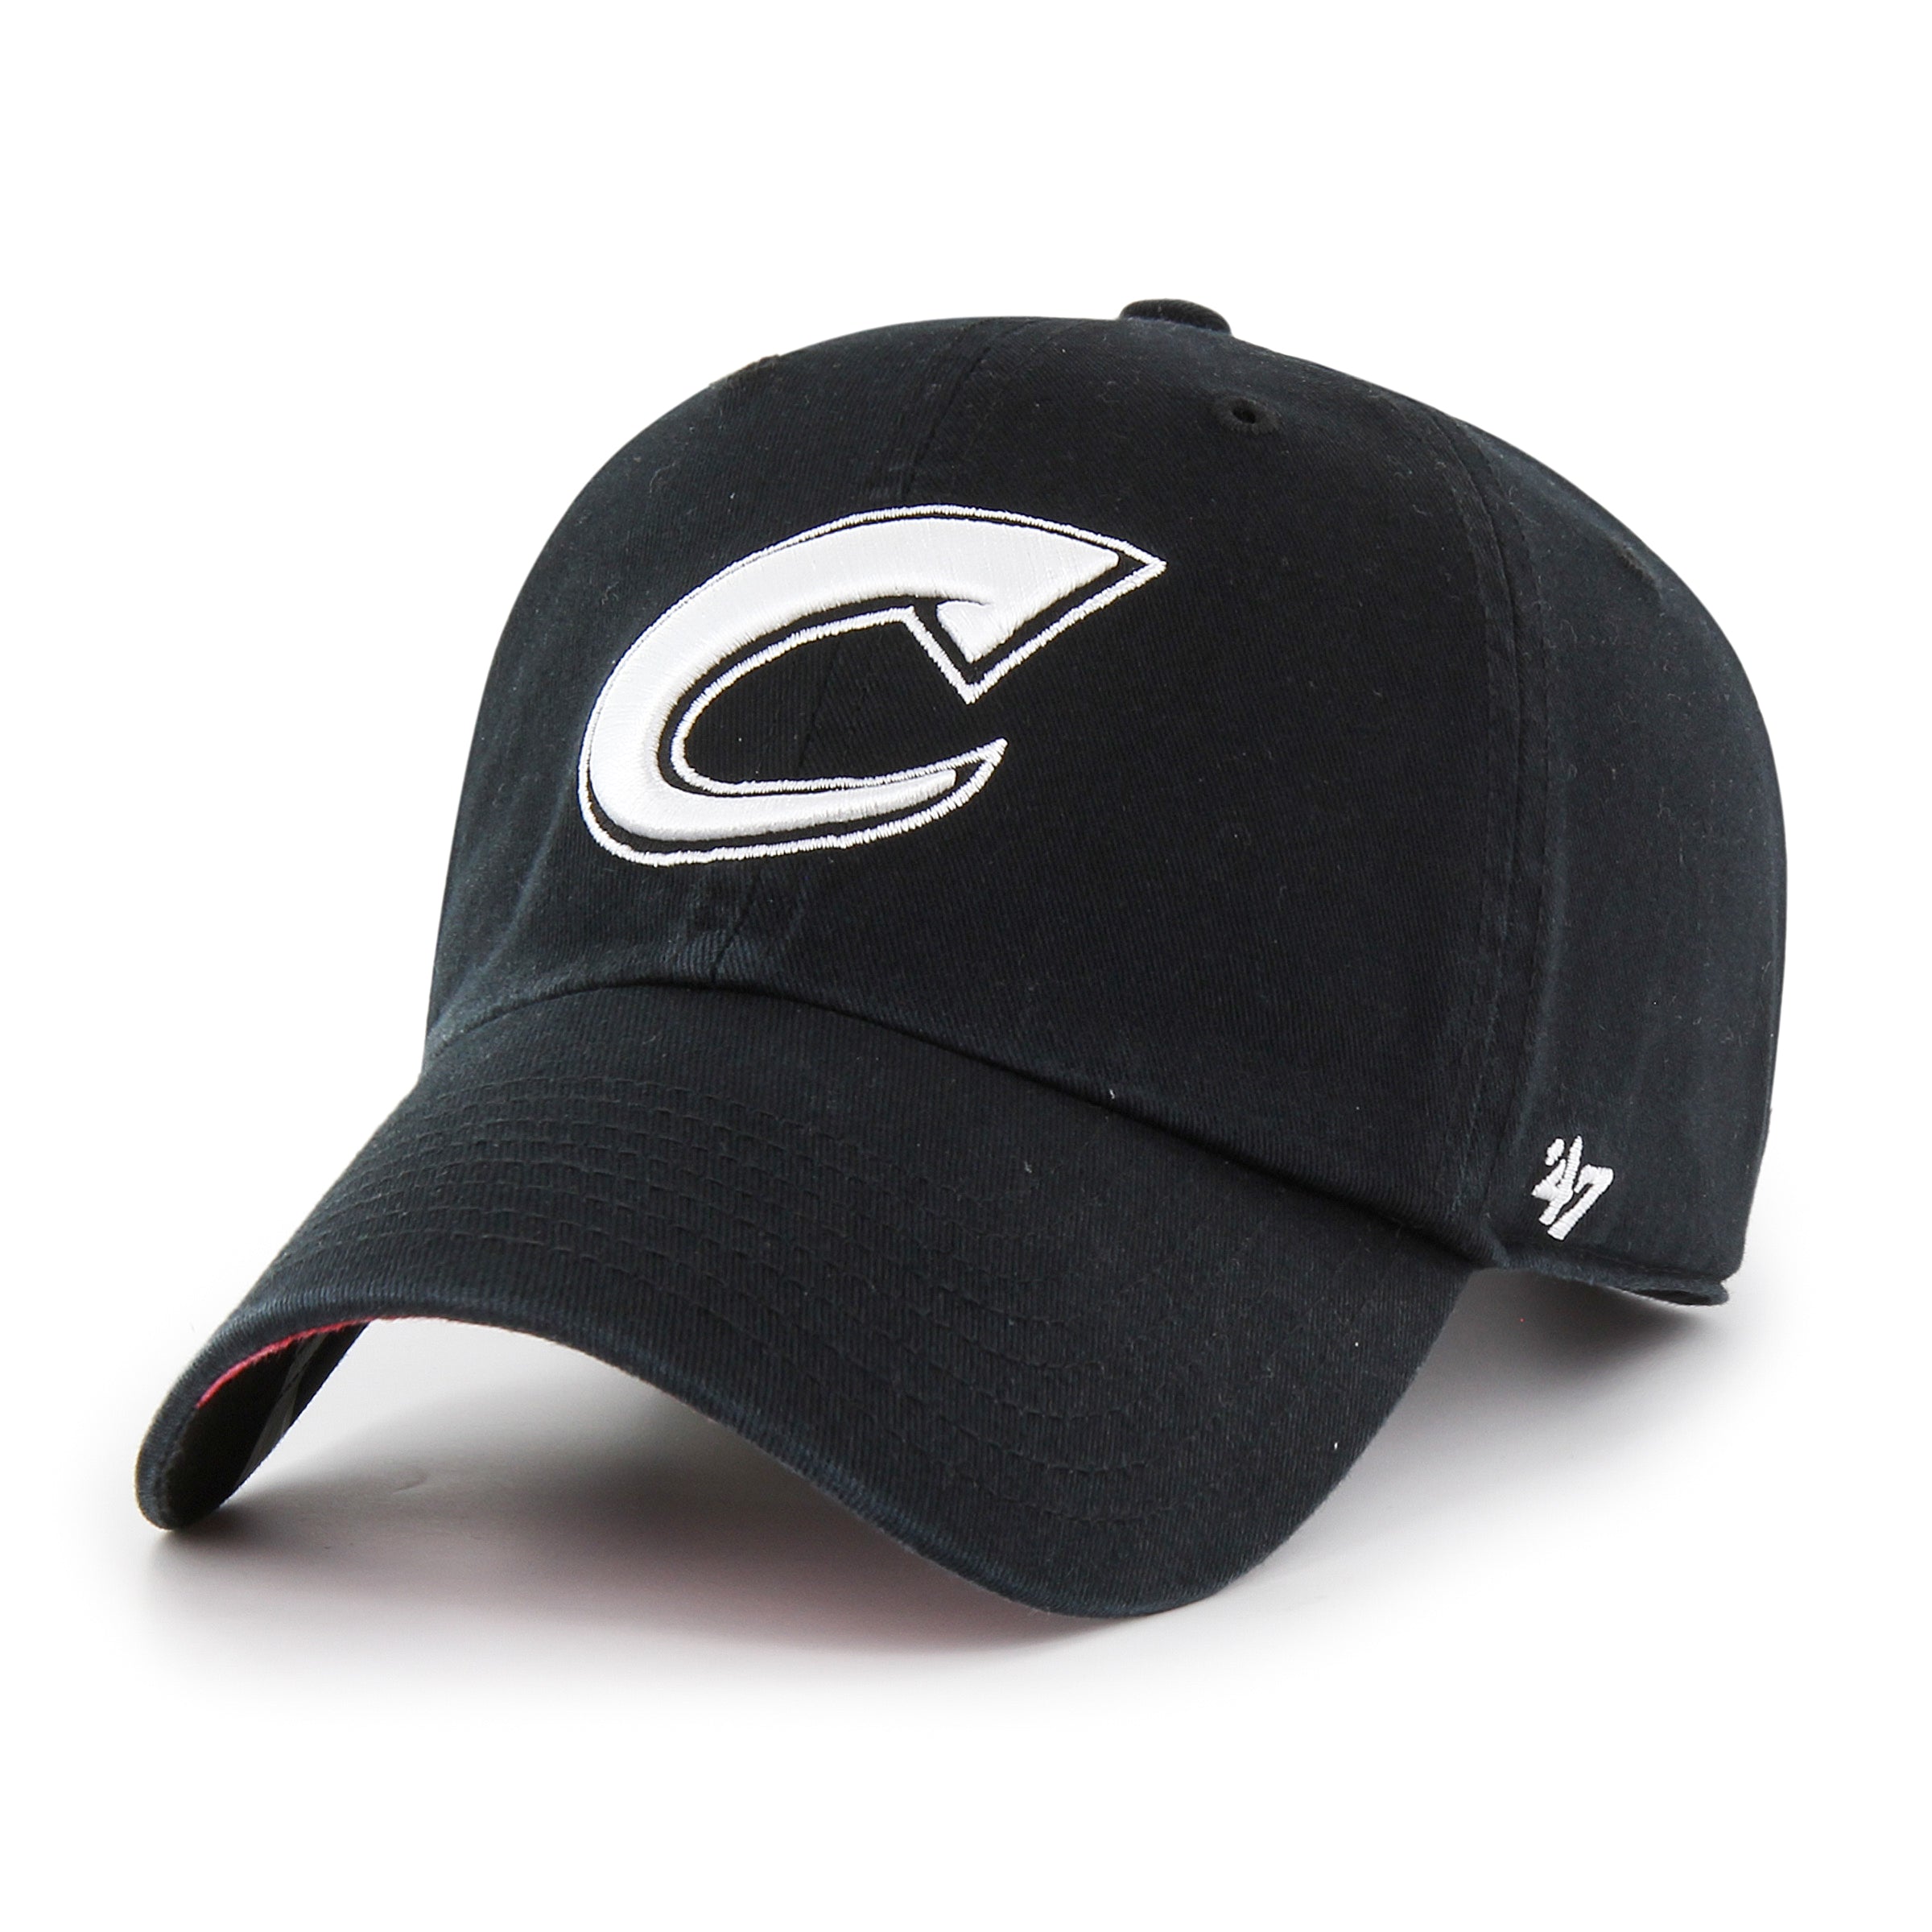 Columbus Clippers 47 Brand Black Dark Tropic Clean up – Columbus Clippers  Official Store